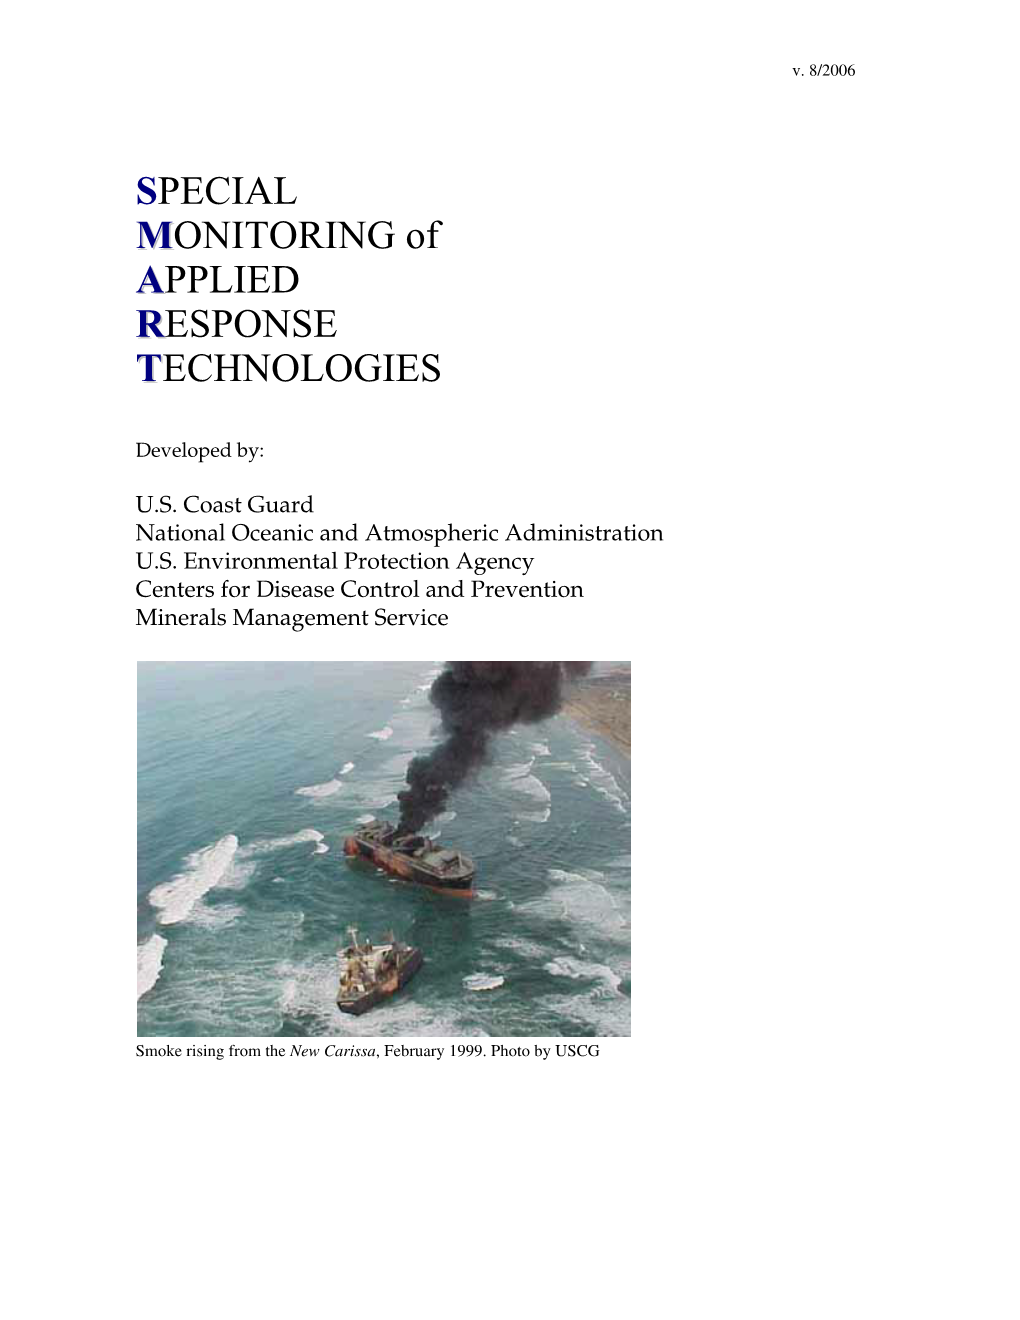 Special Monitoring of Applied Response Technologies (SMART) Program